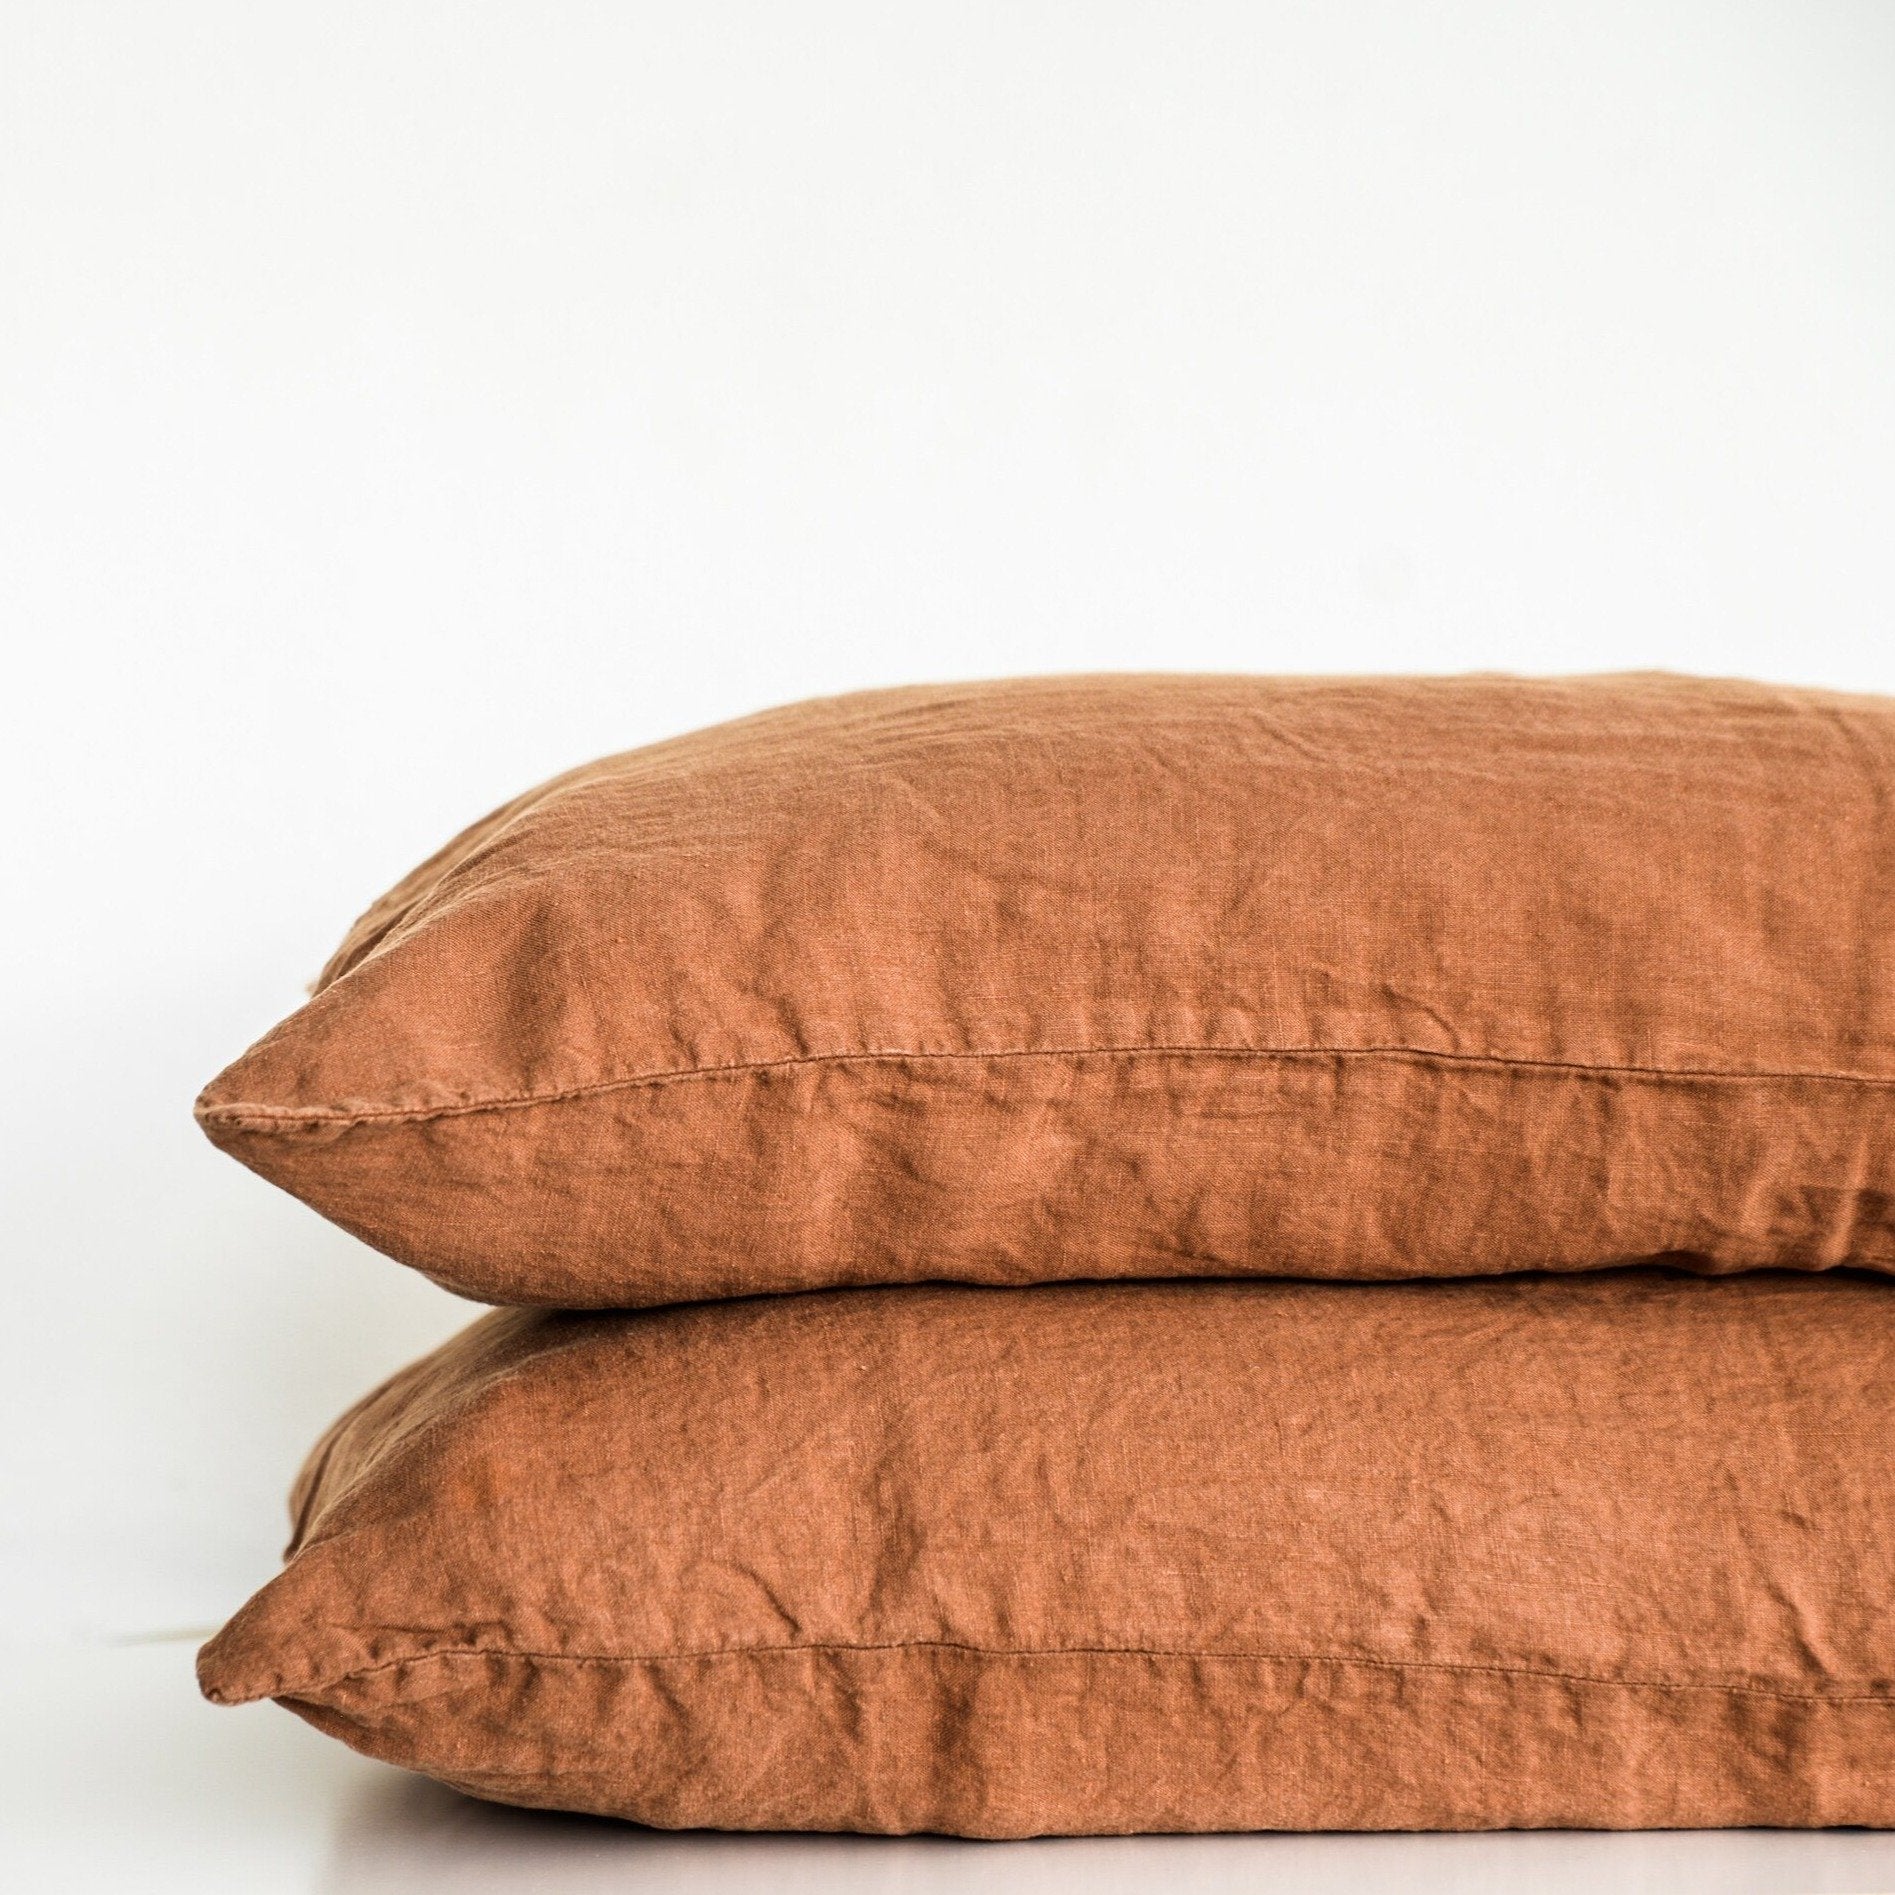 Pillowcases by Beflax Linen